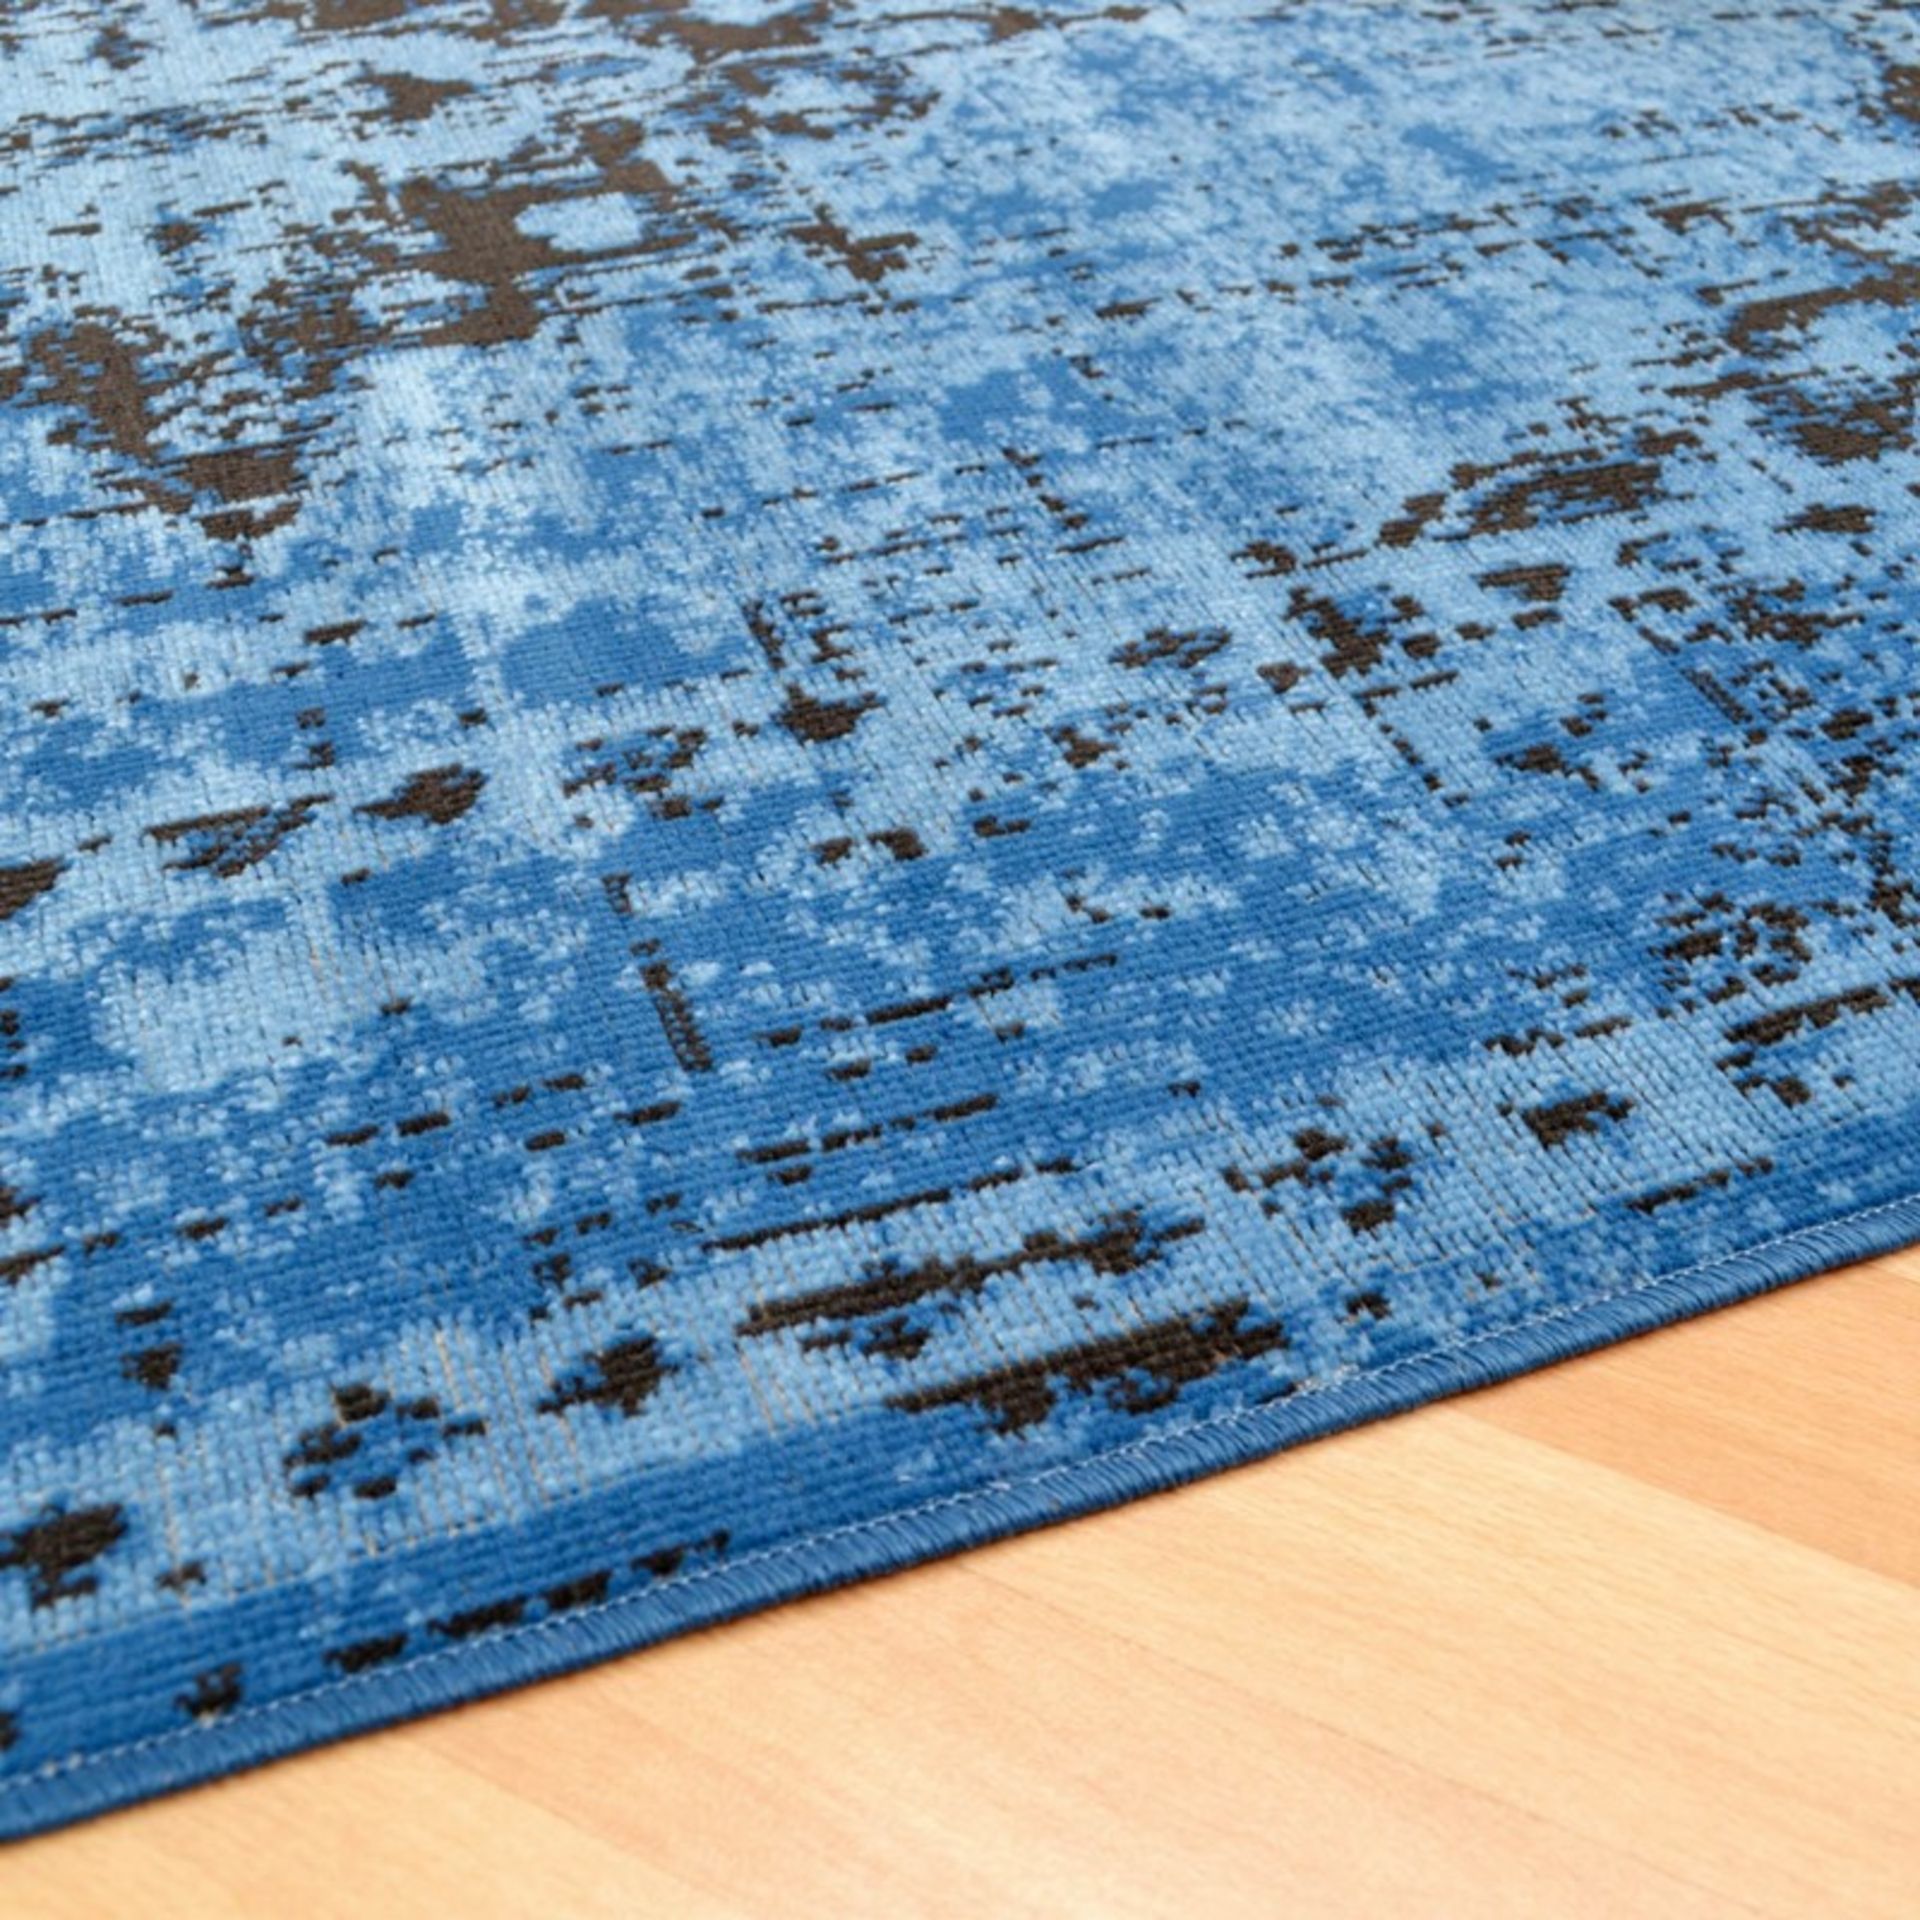 1 x Vintage Style Persian Inspired 'Revive' Rug In Blue - Dimensions: 120 x 170cm - Brand New - Image 3 of 5